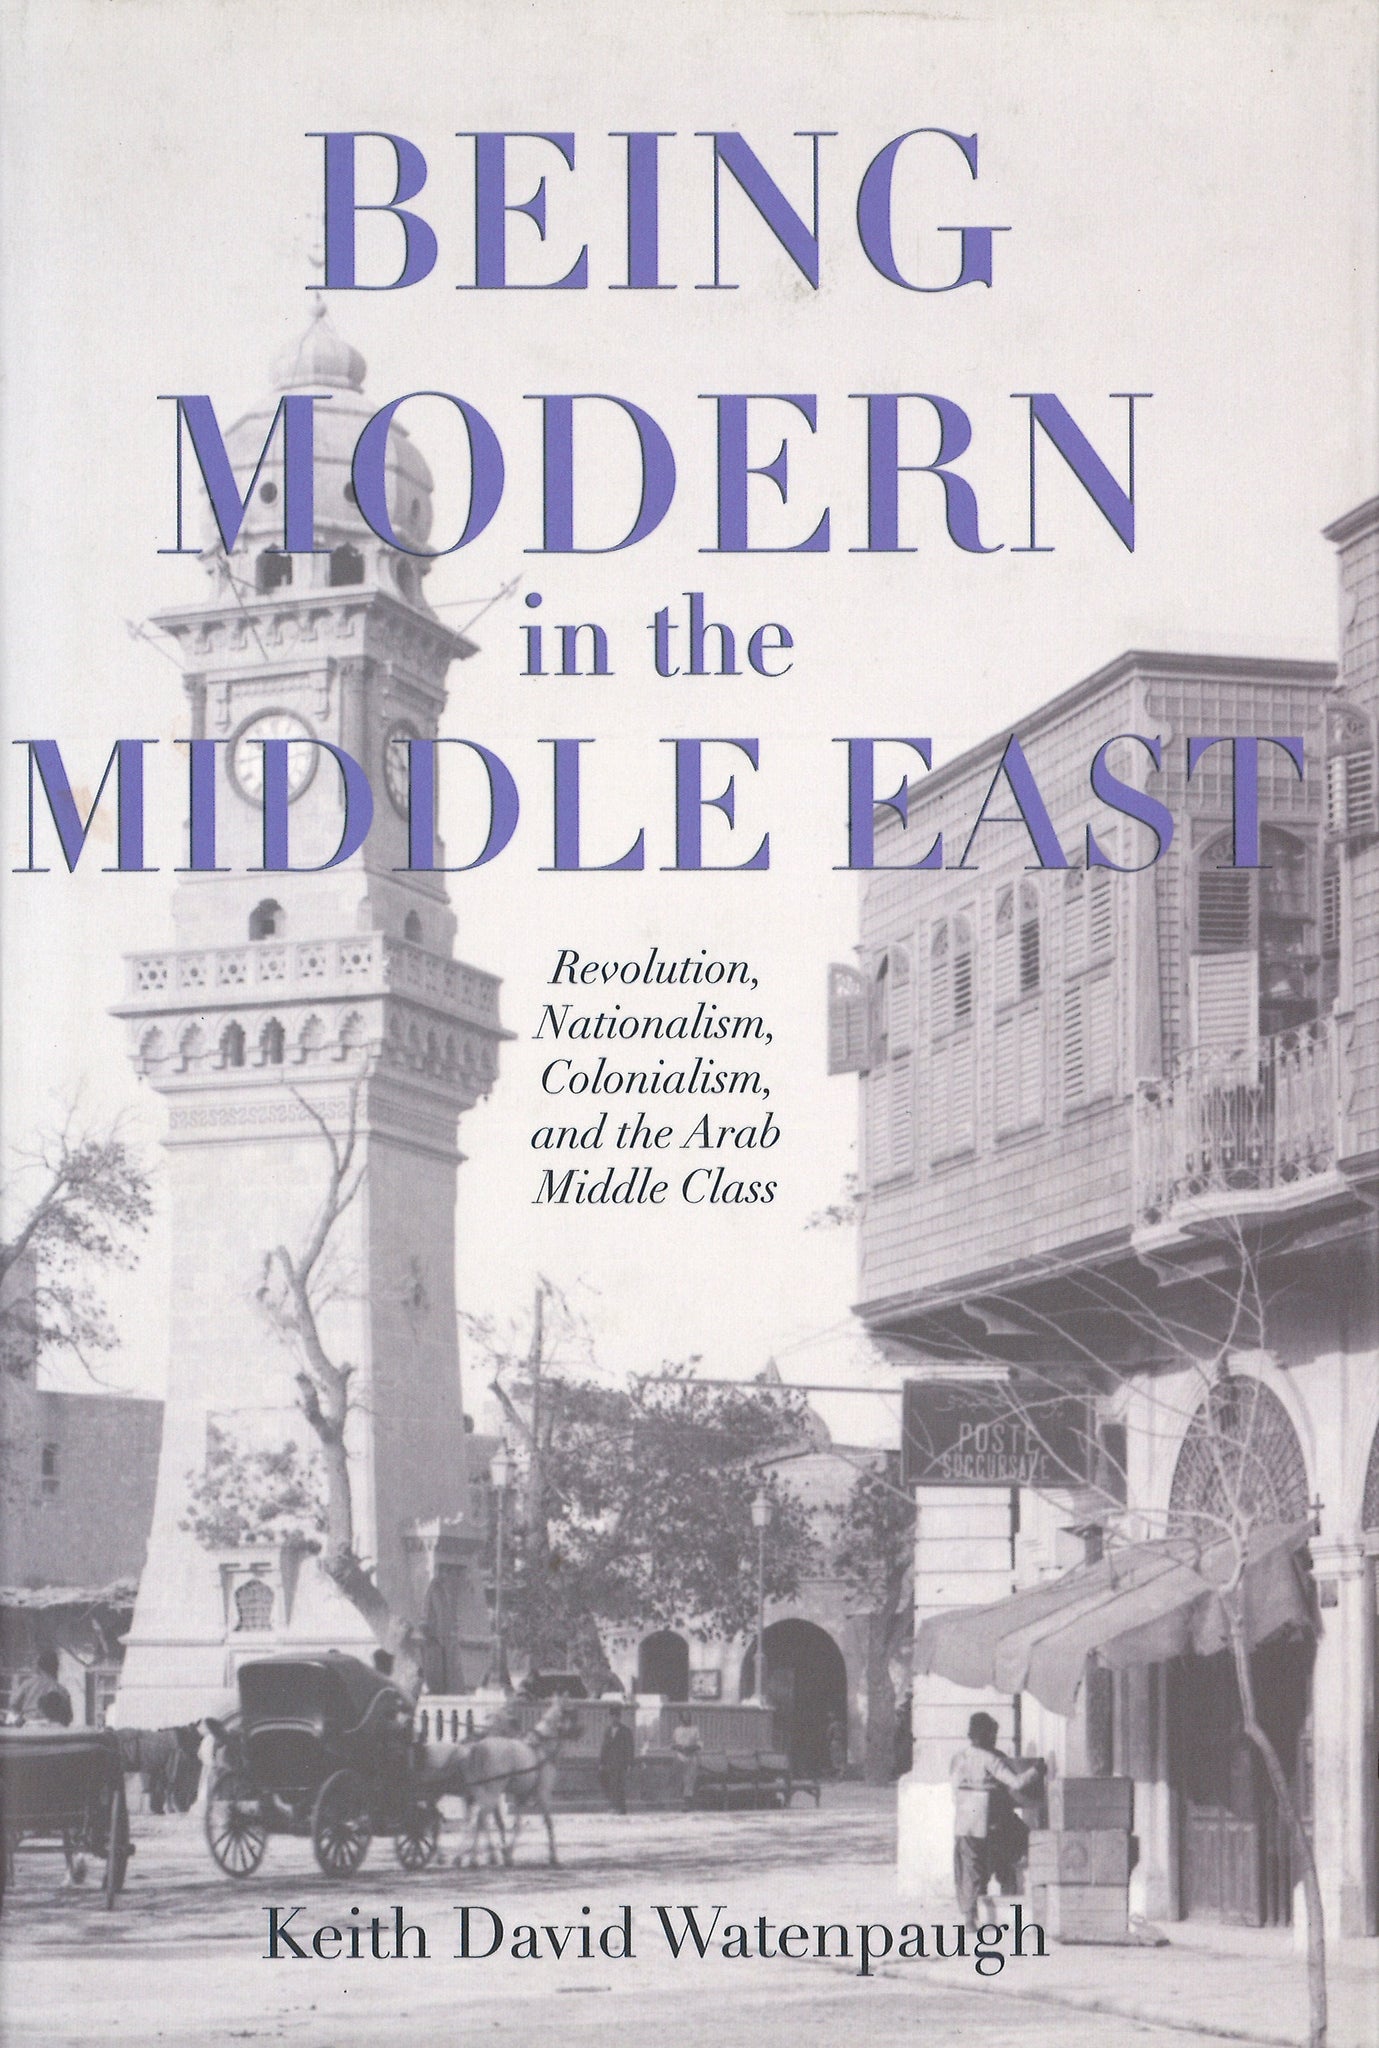 BEING MODERN IN THE MIDDLE EAST: Revolution, Nationalism, Colonialism, and the Arab Middle Class